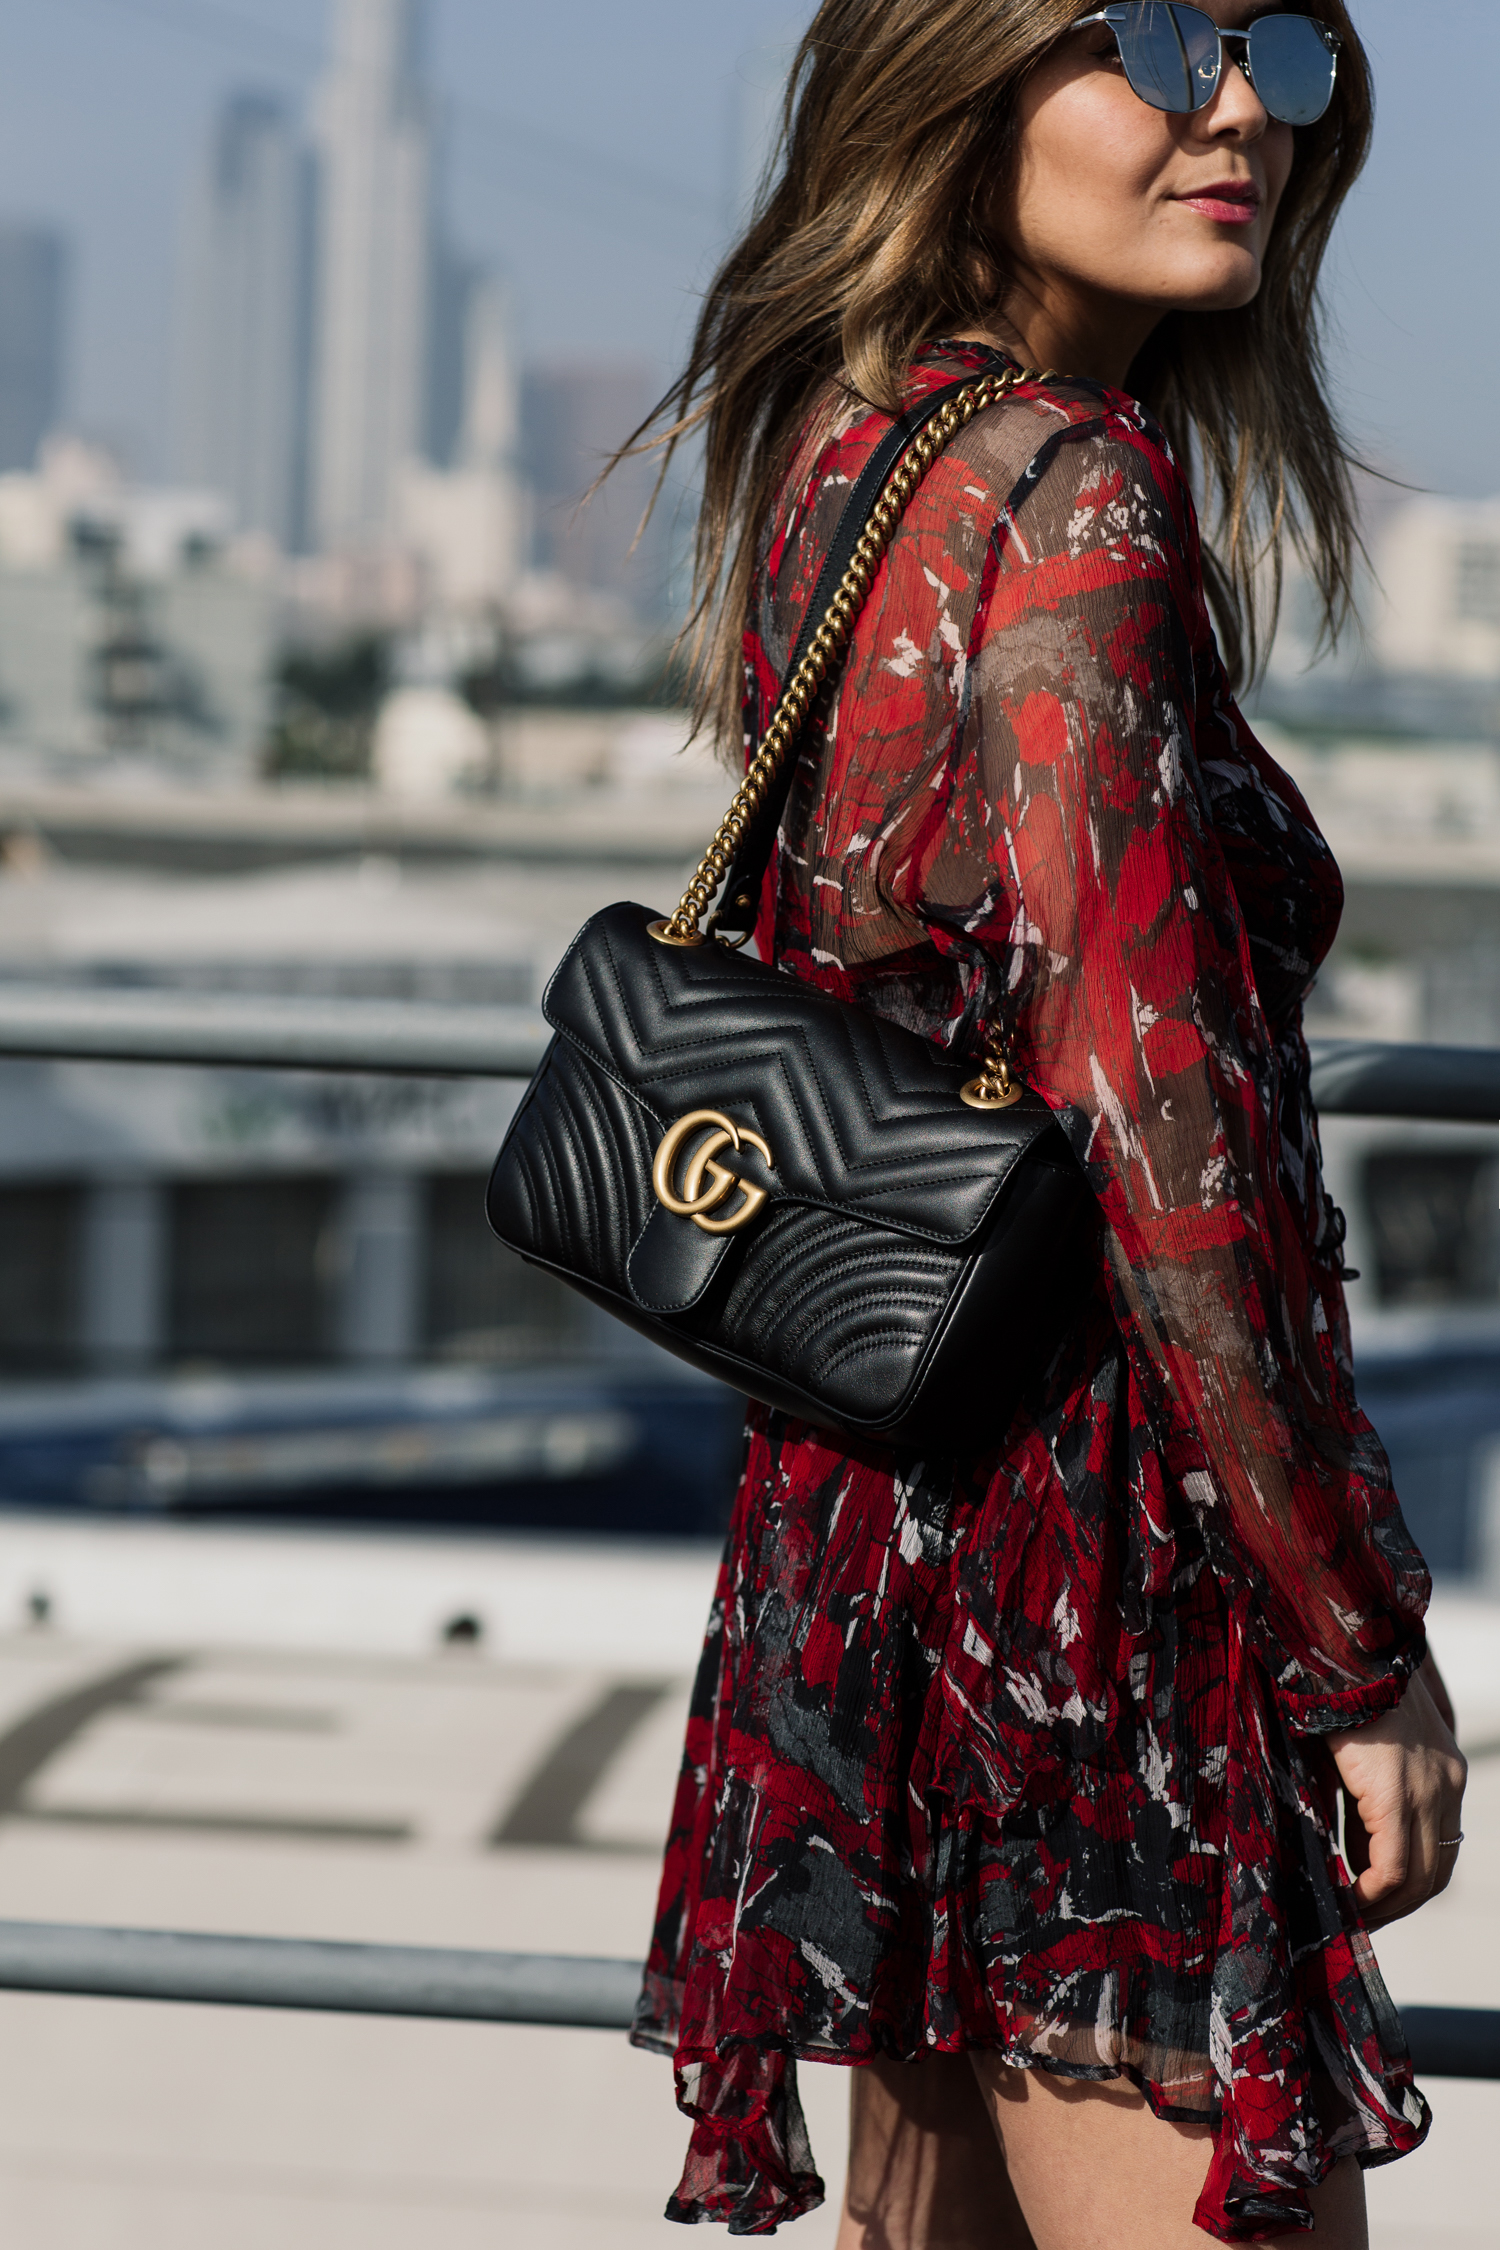 Brunette woman, blogger Sara Azani of Style MBA poses outside in front of a cityscape during the daytime wearing an IRO little red dress, Gucci GG Marmont quilted leather shoulder bag with gold hardware, Chloé Susanna Stud Buckle Booties.